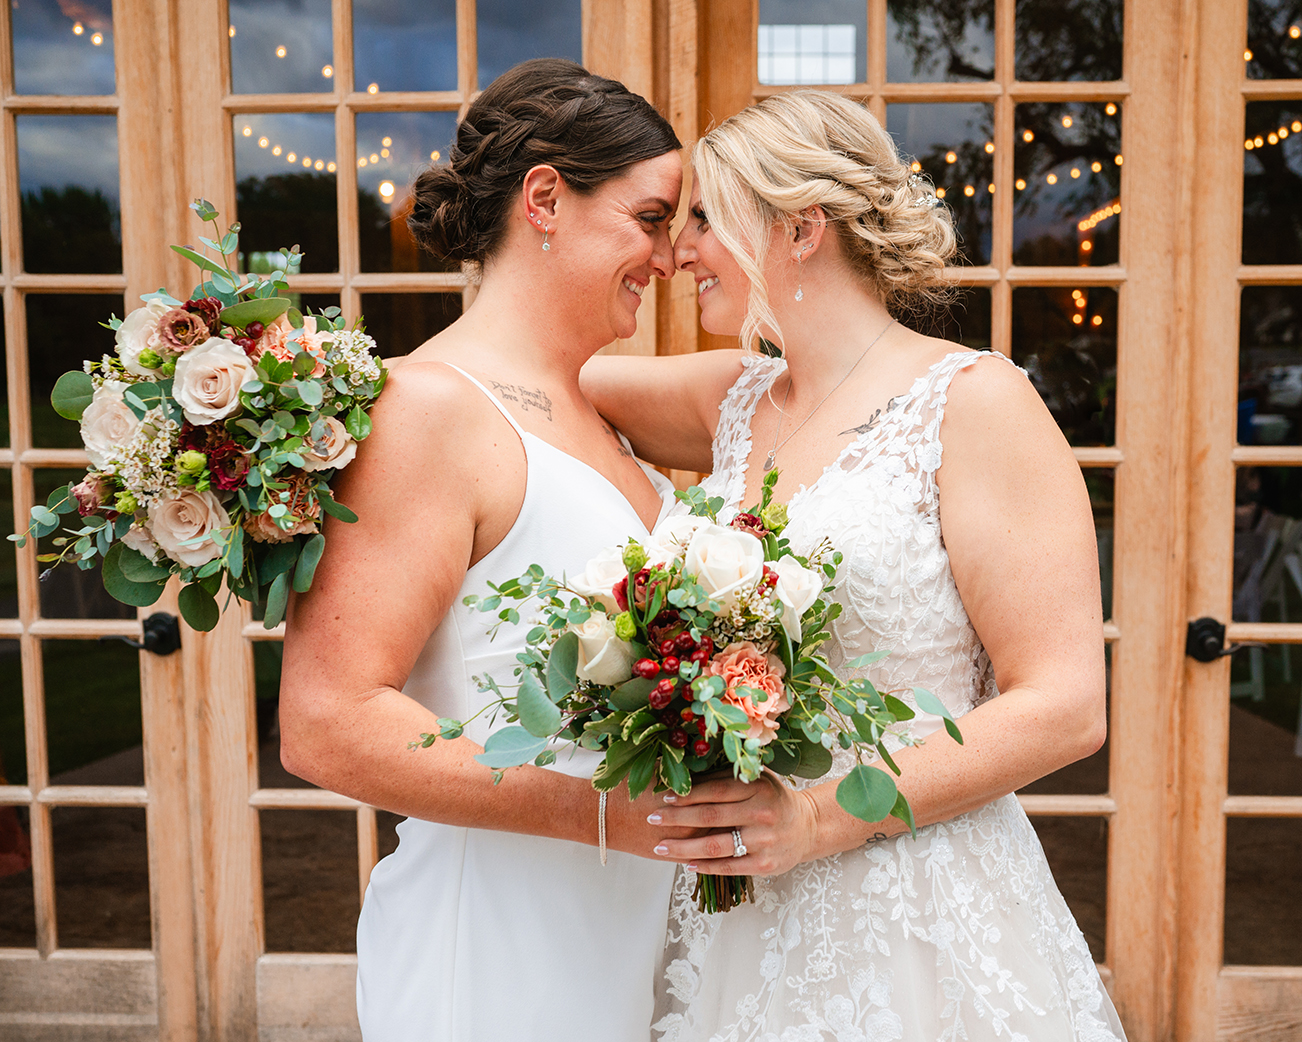 two brides in white wedding dresses with bouquets touch foreheads